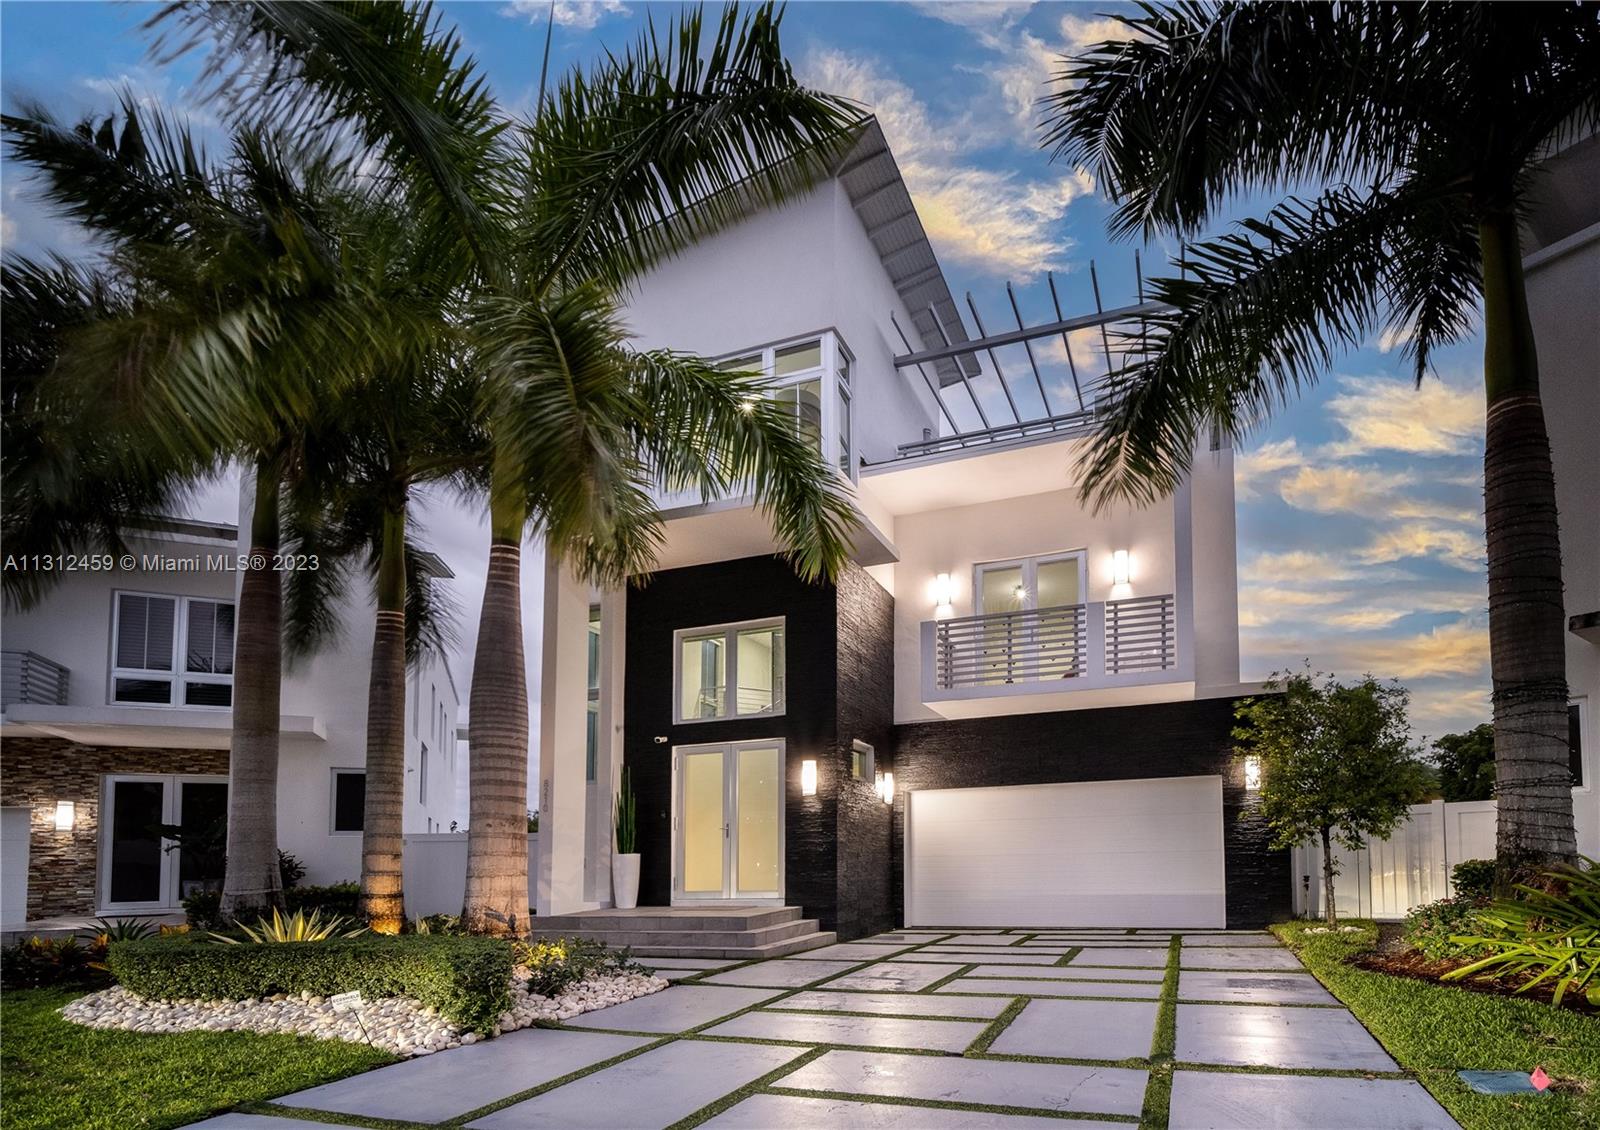 The largest home/lot in the most desirable gated community in Doral,Oasis Park, Where you can take a walk to the adjacent CityPlace Doral filled with dining and entertainment. The 3 level home has a beautiful marble staircase, or you can take the ultra modern glass elevator to access 5 bedroom, 6.5 bathrooms. New roof as of 2022, Chef's dream with a total of 3 kitchens. Resort style patio on double wide lot with a massive pergola, pool and covered summer kitchen. Expansive rooftop with kitchen,jacuzzi and area to entertain! Additional:wine cellar, office, impact windows/doors, and 2 car garage and full equipped gym inside. This is an amazing property for investors too as property can rent between 15k - 18k month, yielding a very high rental return. Home has fully water filtration system!!